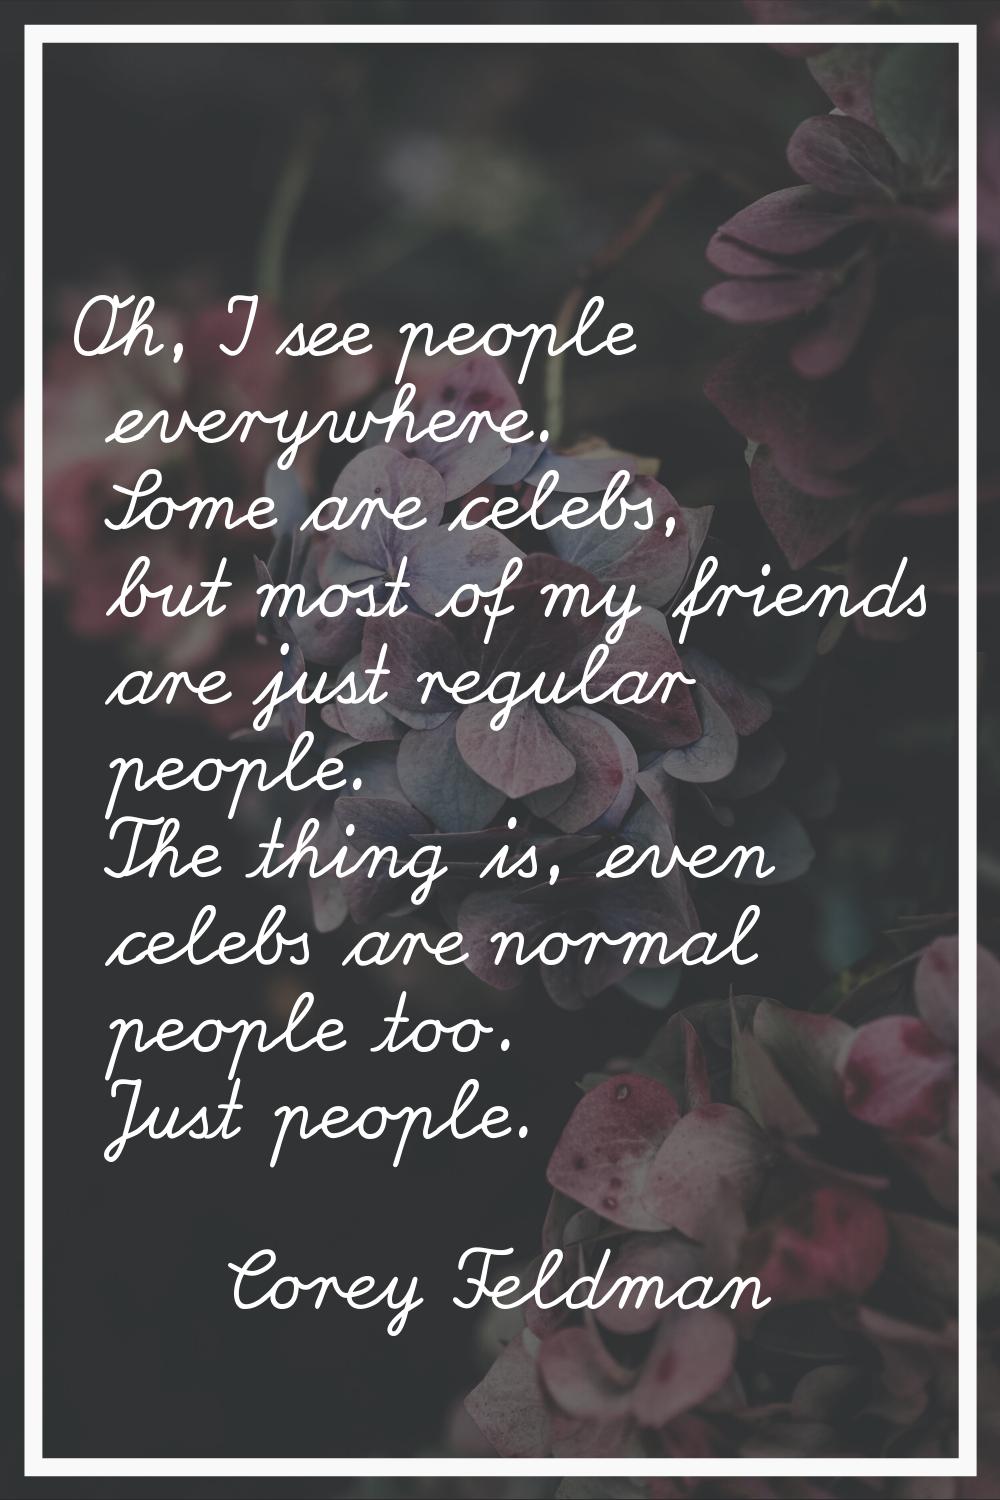 Oh, I see people everywhere. Some are celebs, but most of my friends are just regular people. The t